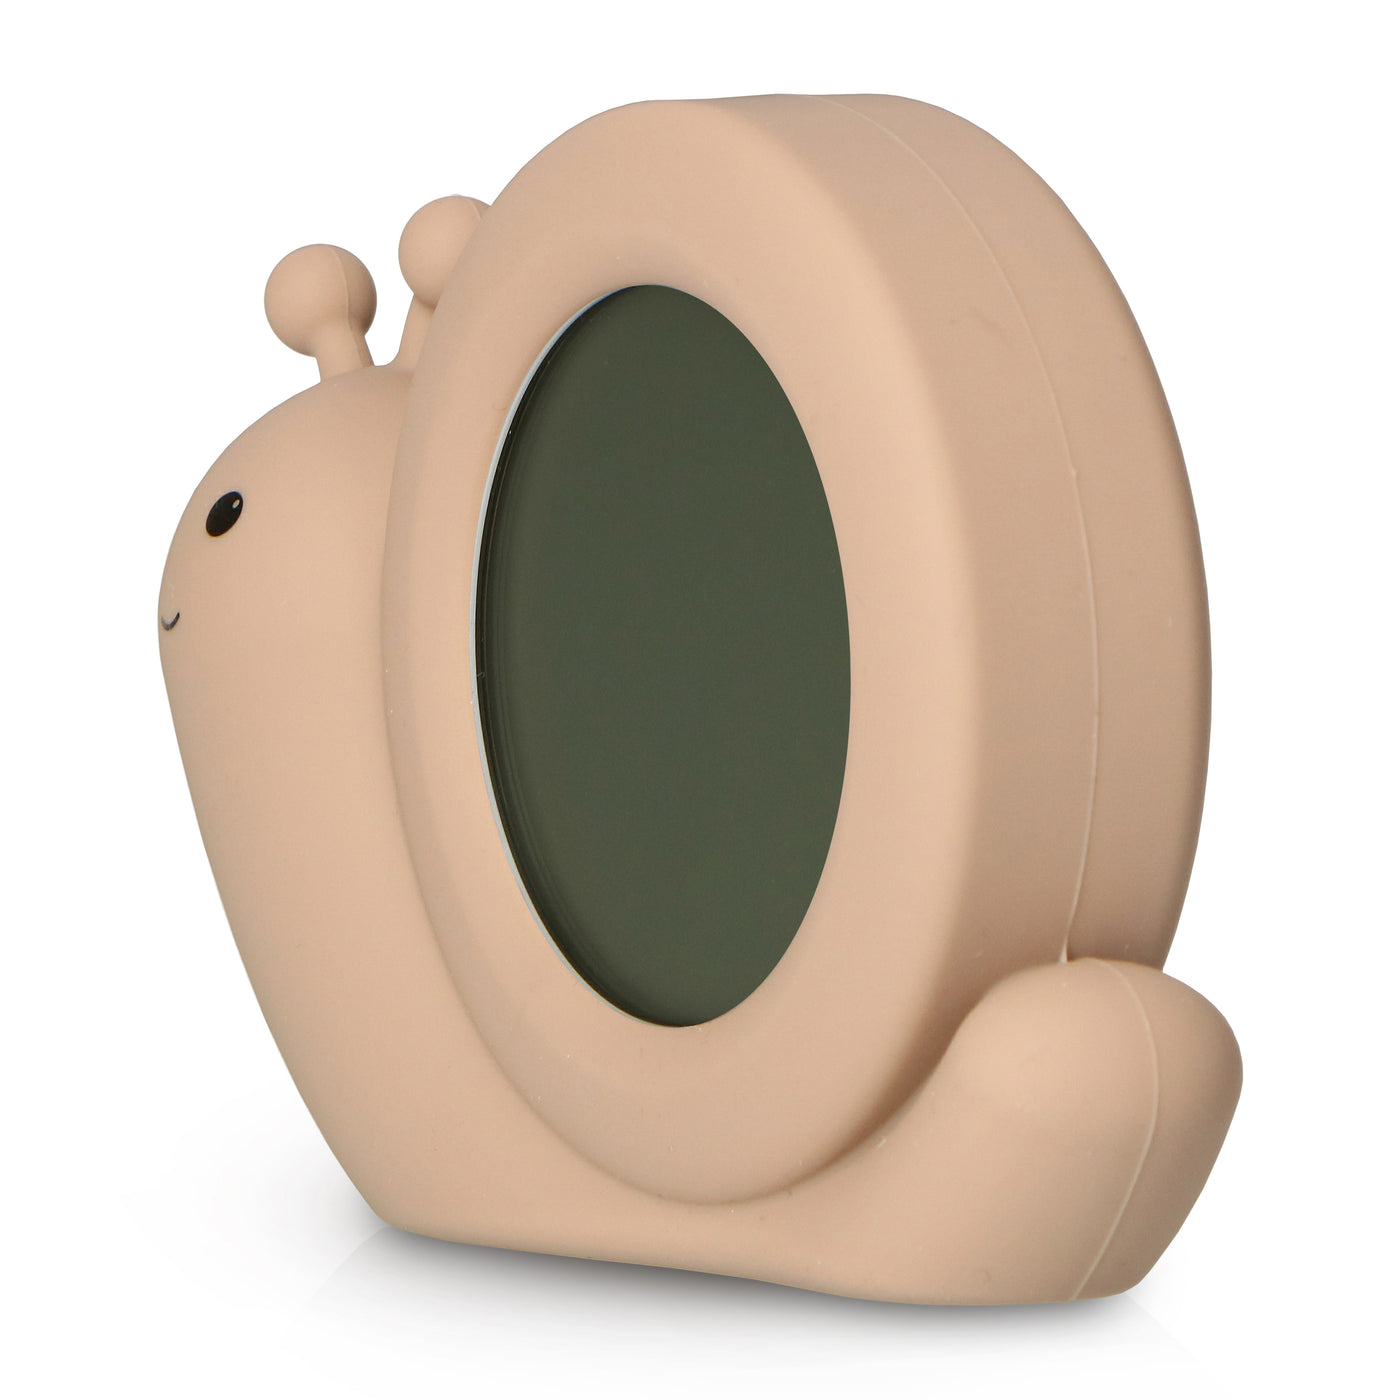 Alecto Baby BC110BE SIMON - Sleep trainer, night light and alarm clock, snail, taupe